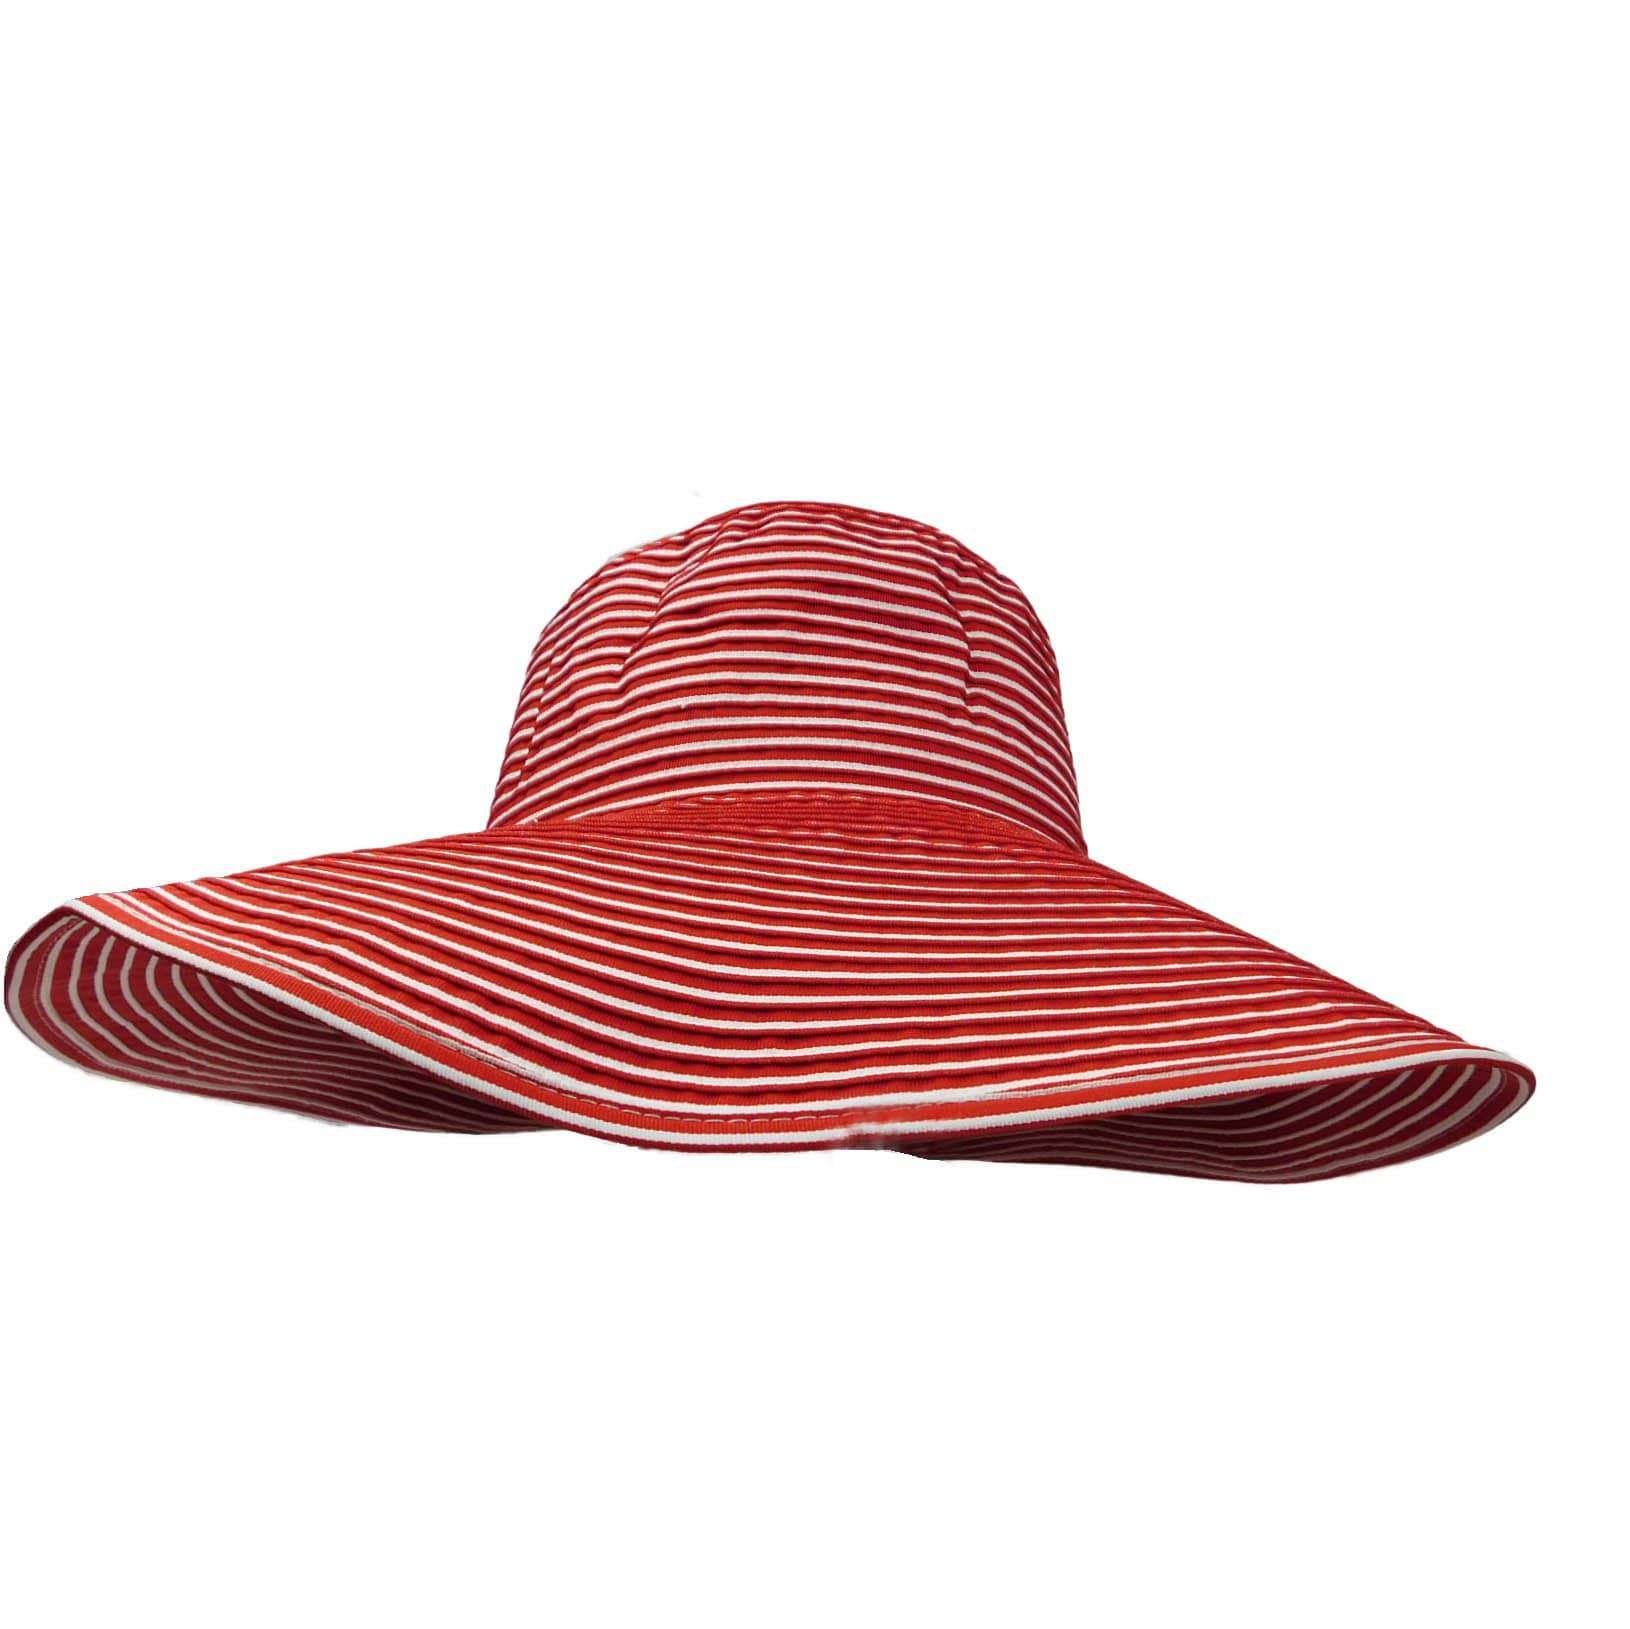 Striped Large Brim Sun Hat - Scala Hats Floppy Hat Scala Hats WSlc710RD Red  